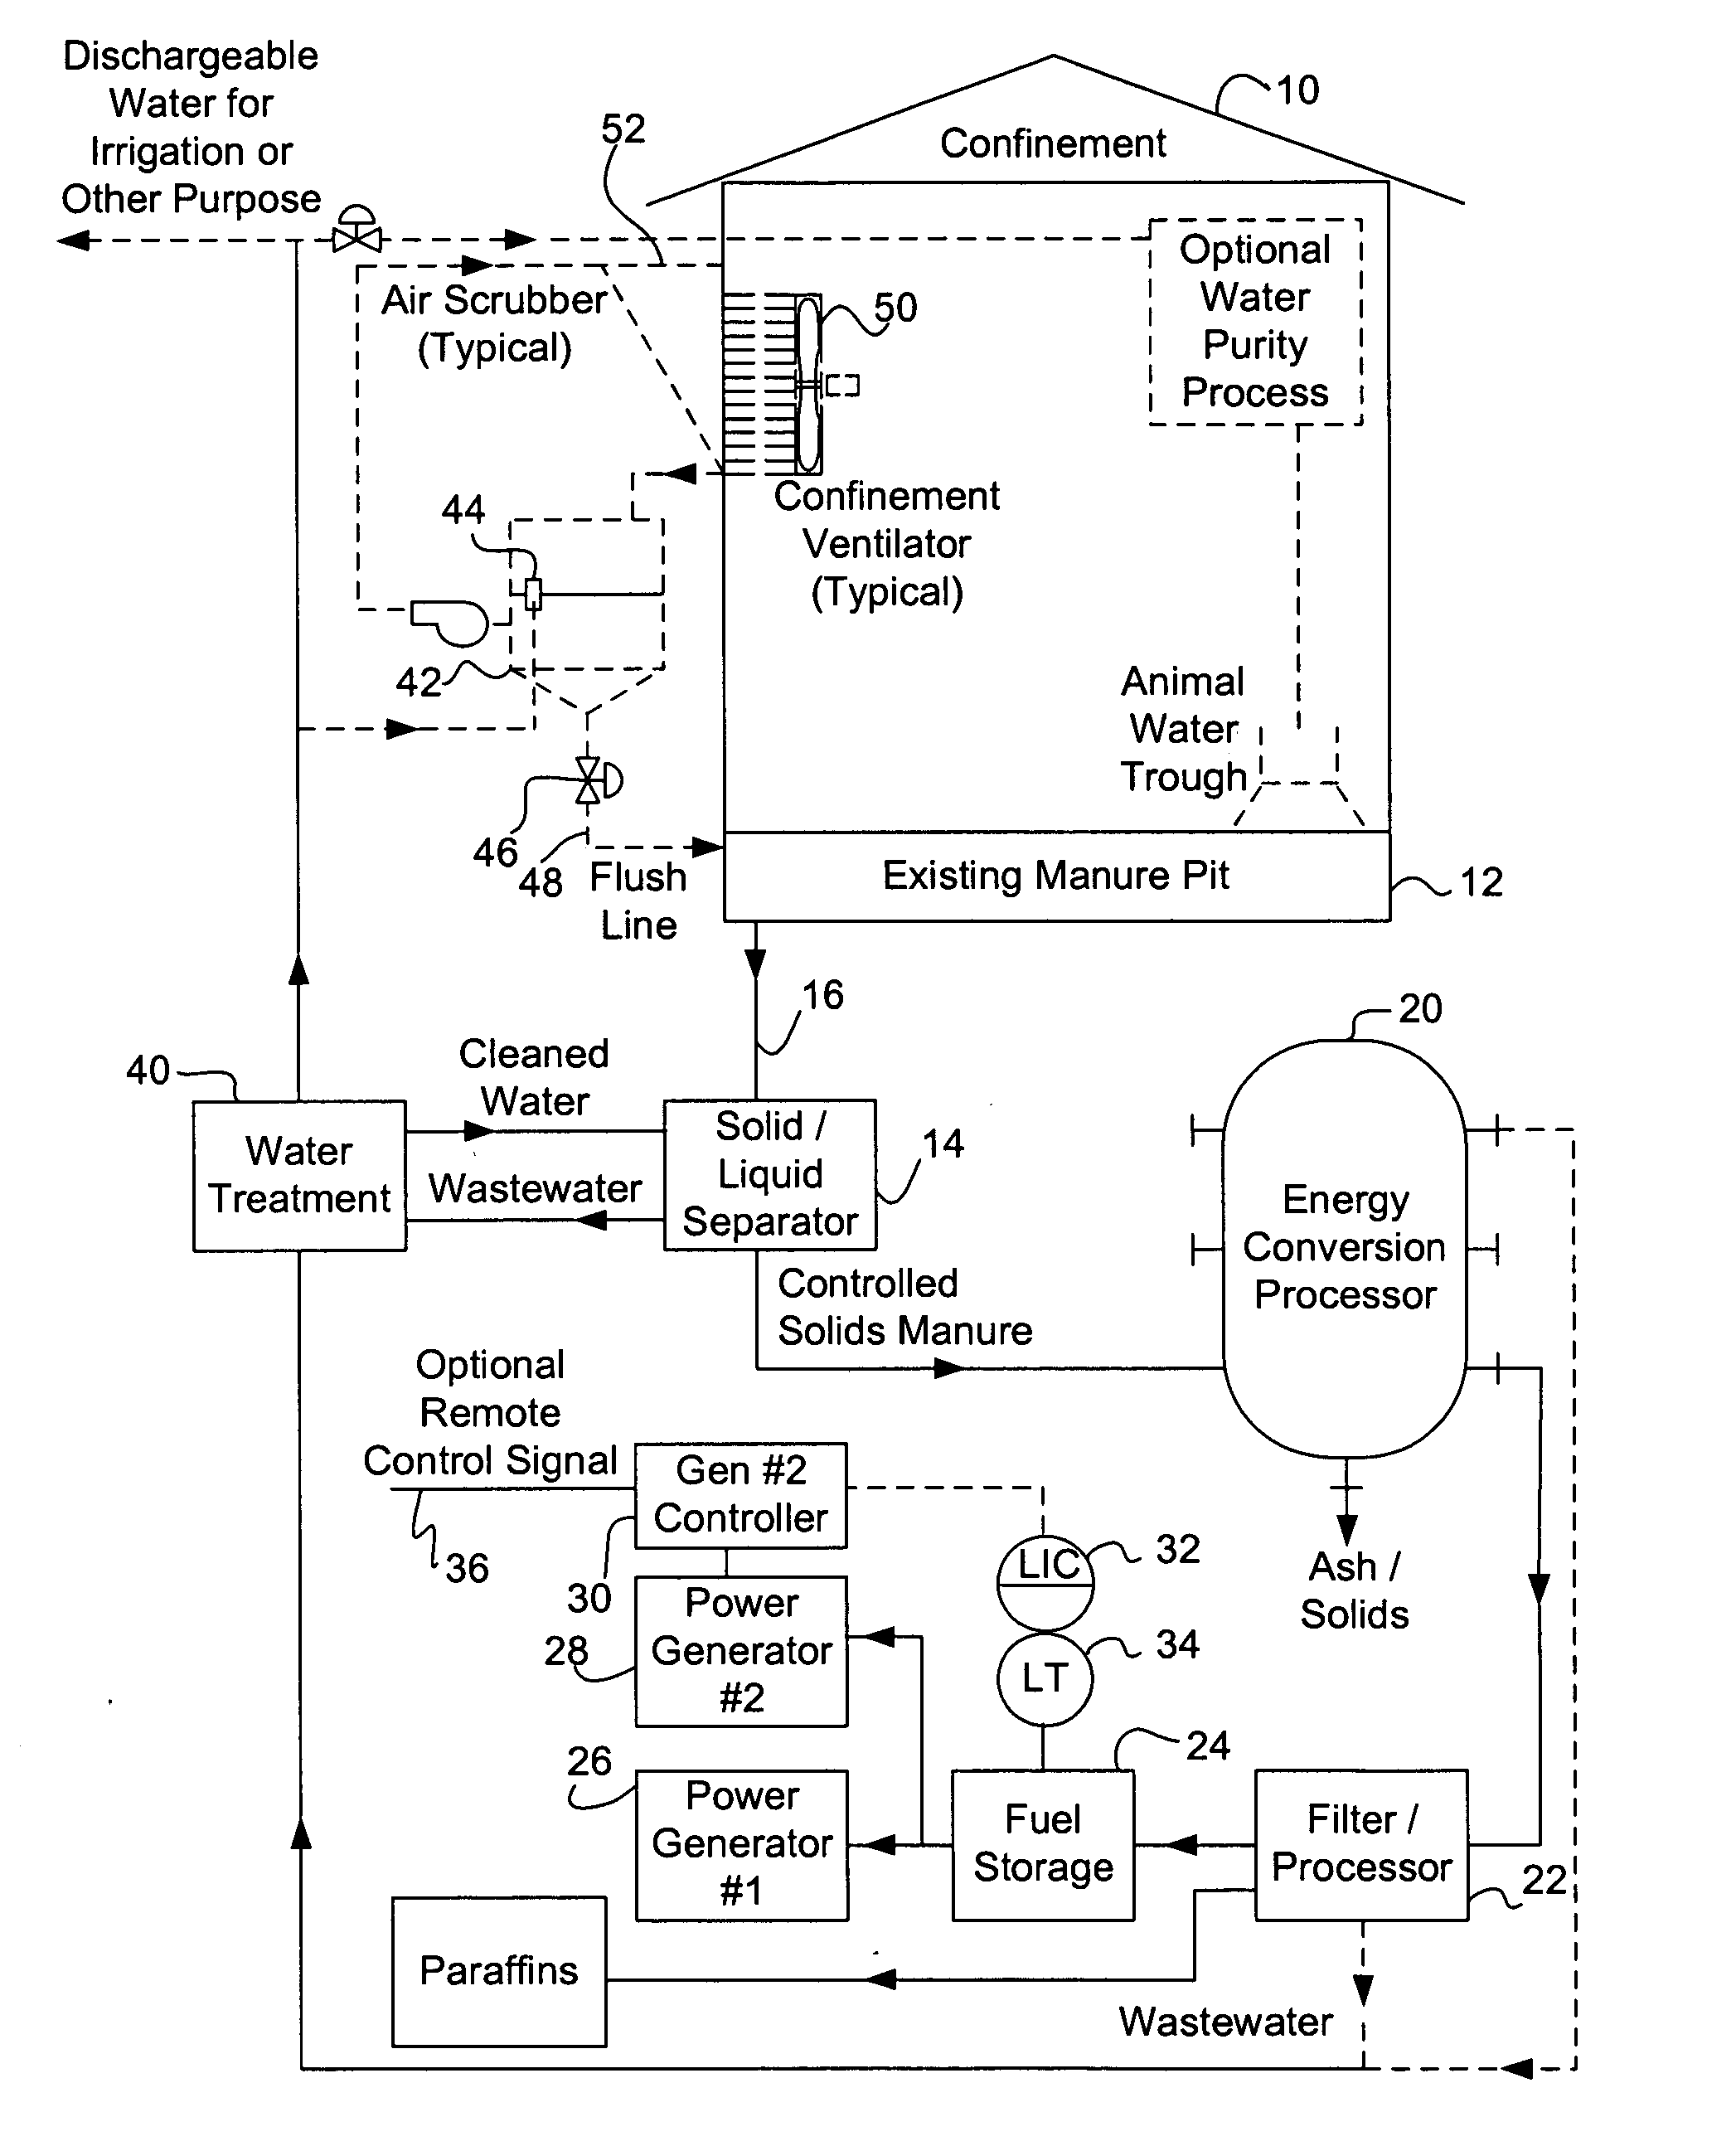 Methods and systems for converting waste into energy